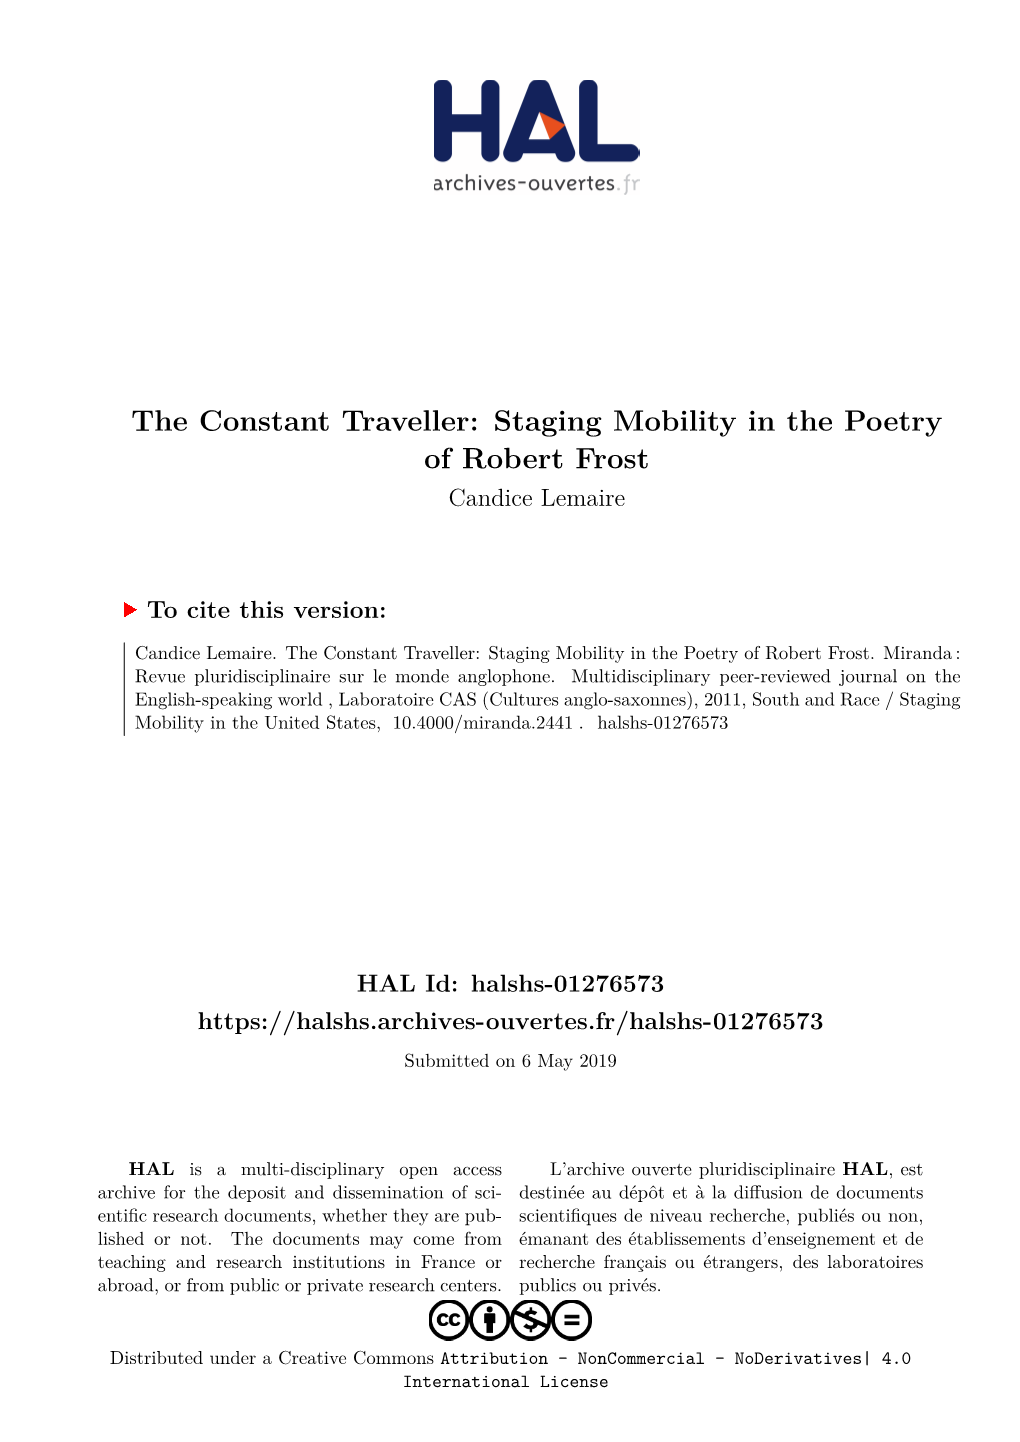 Staging Mobility in the Poetry of Robert Frost Candice Lemaire